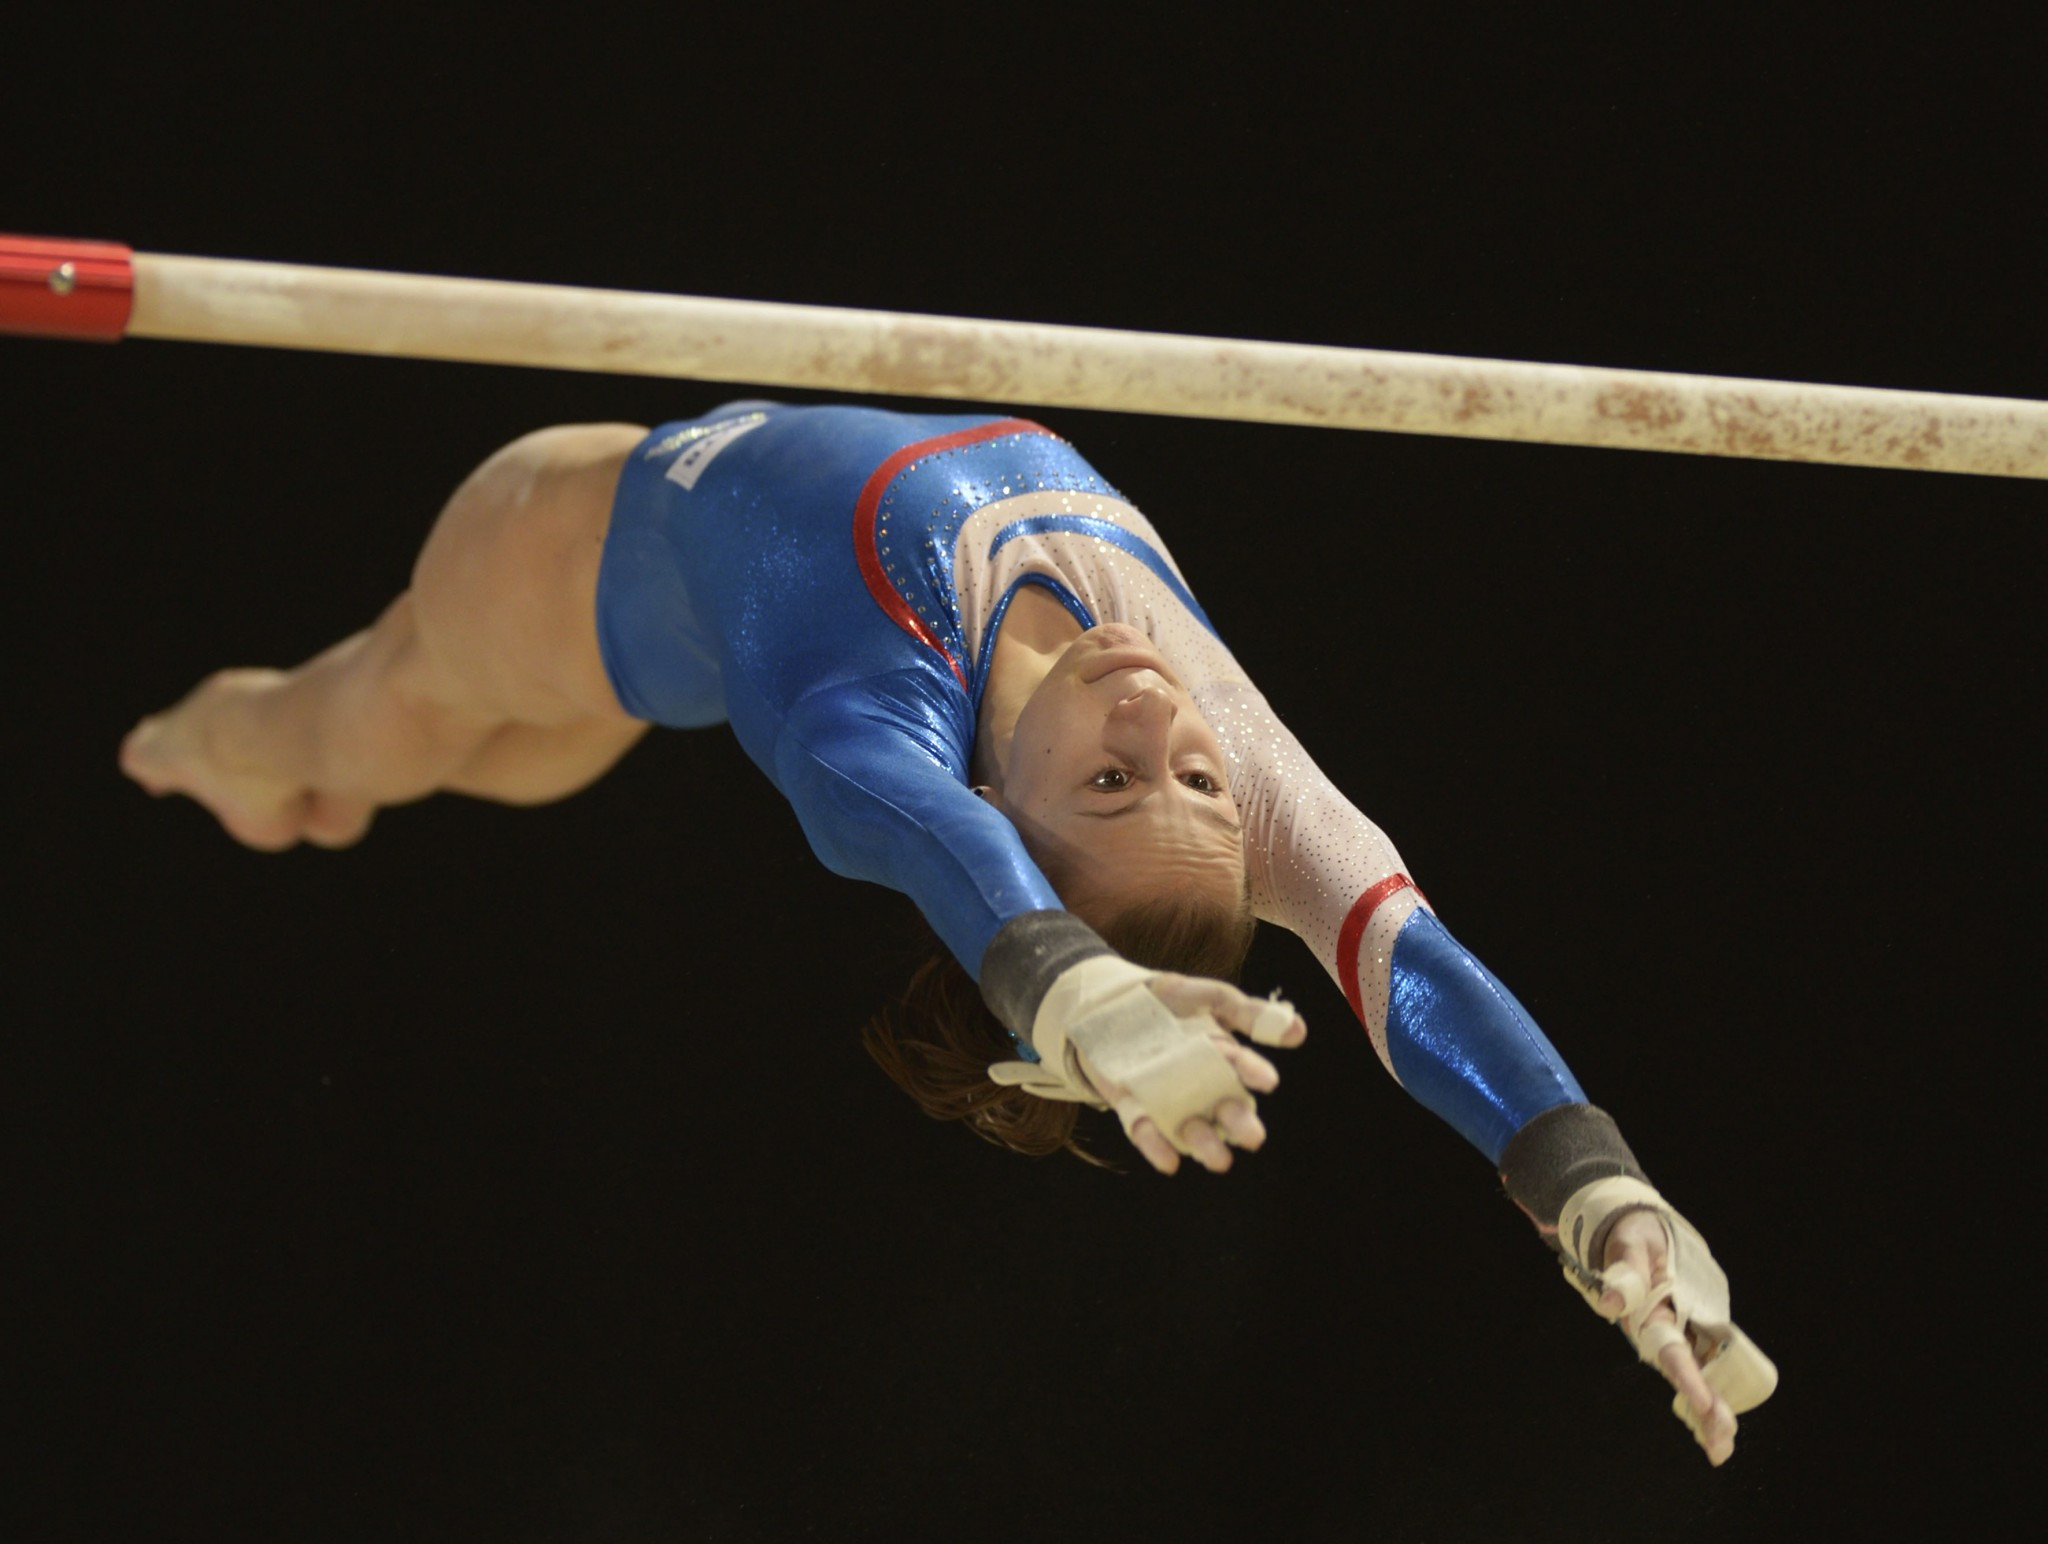 Russian Kharenkova leads all-around after day one at European Artistic Gymnastics Individual Championships